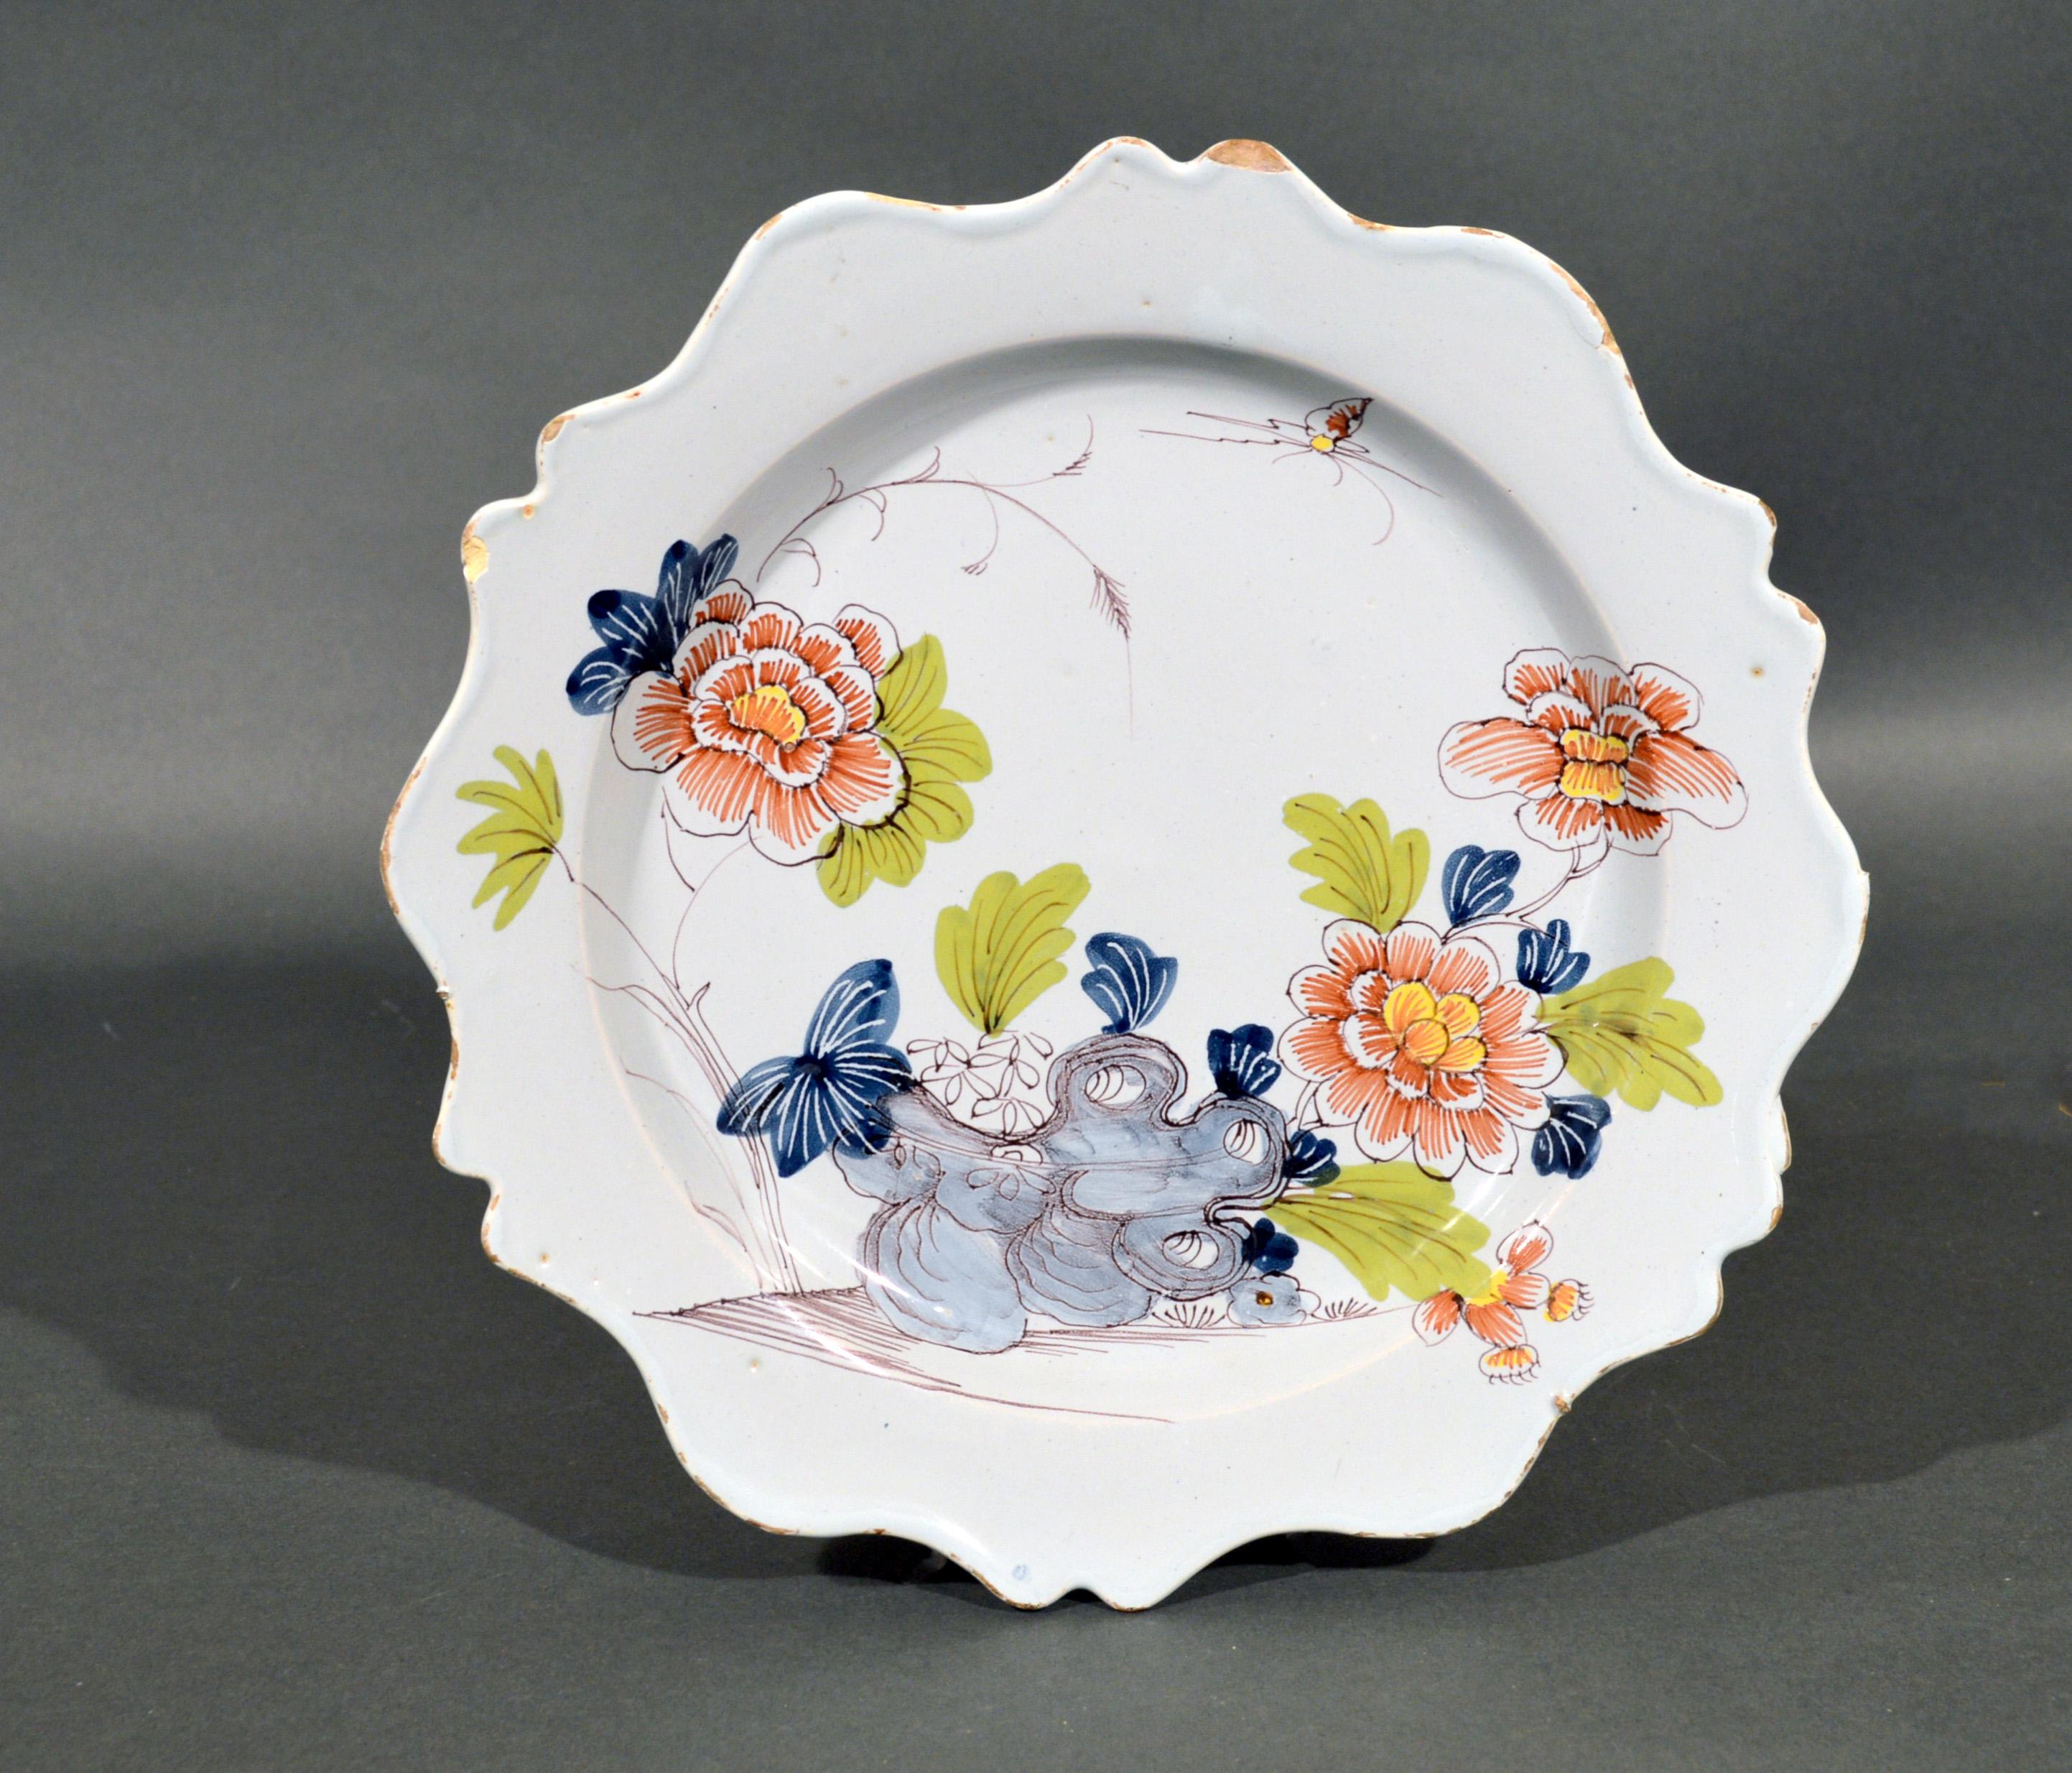 Wonderful set of six Bristol delftware polychrome Chinoiserie scalloped plates,
Redbank Back Factory,
Circa 1760

The plates have a most appealing, bright coloration and a lovely and unusual shape- very appealing on the table or wall.

The set of